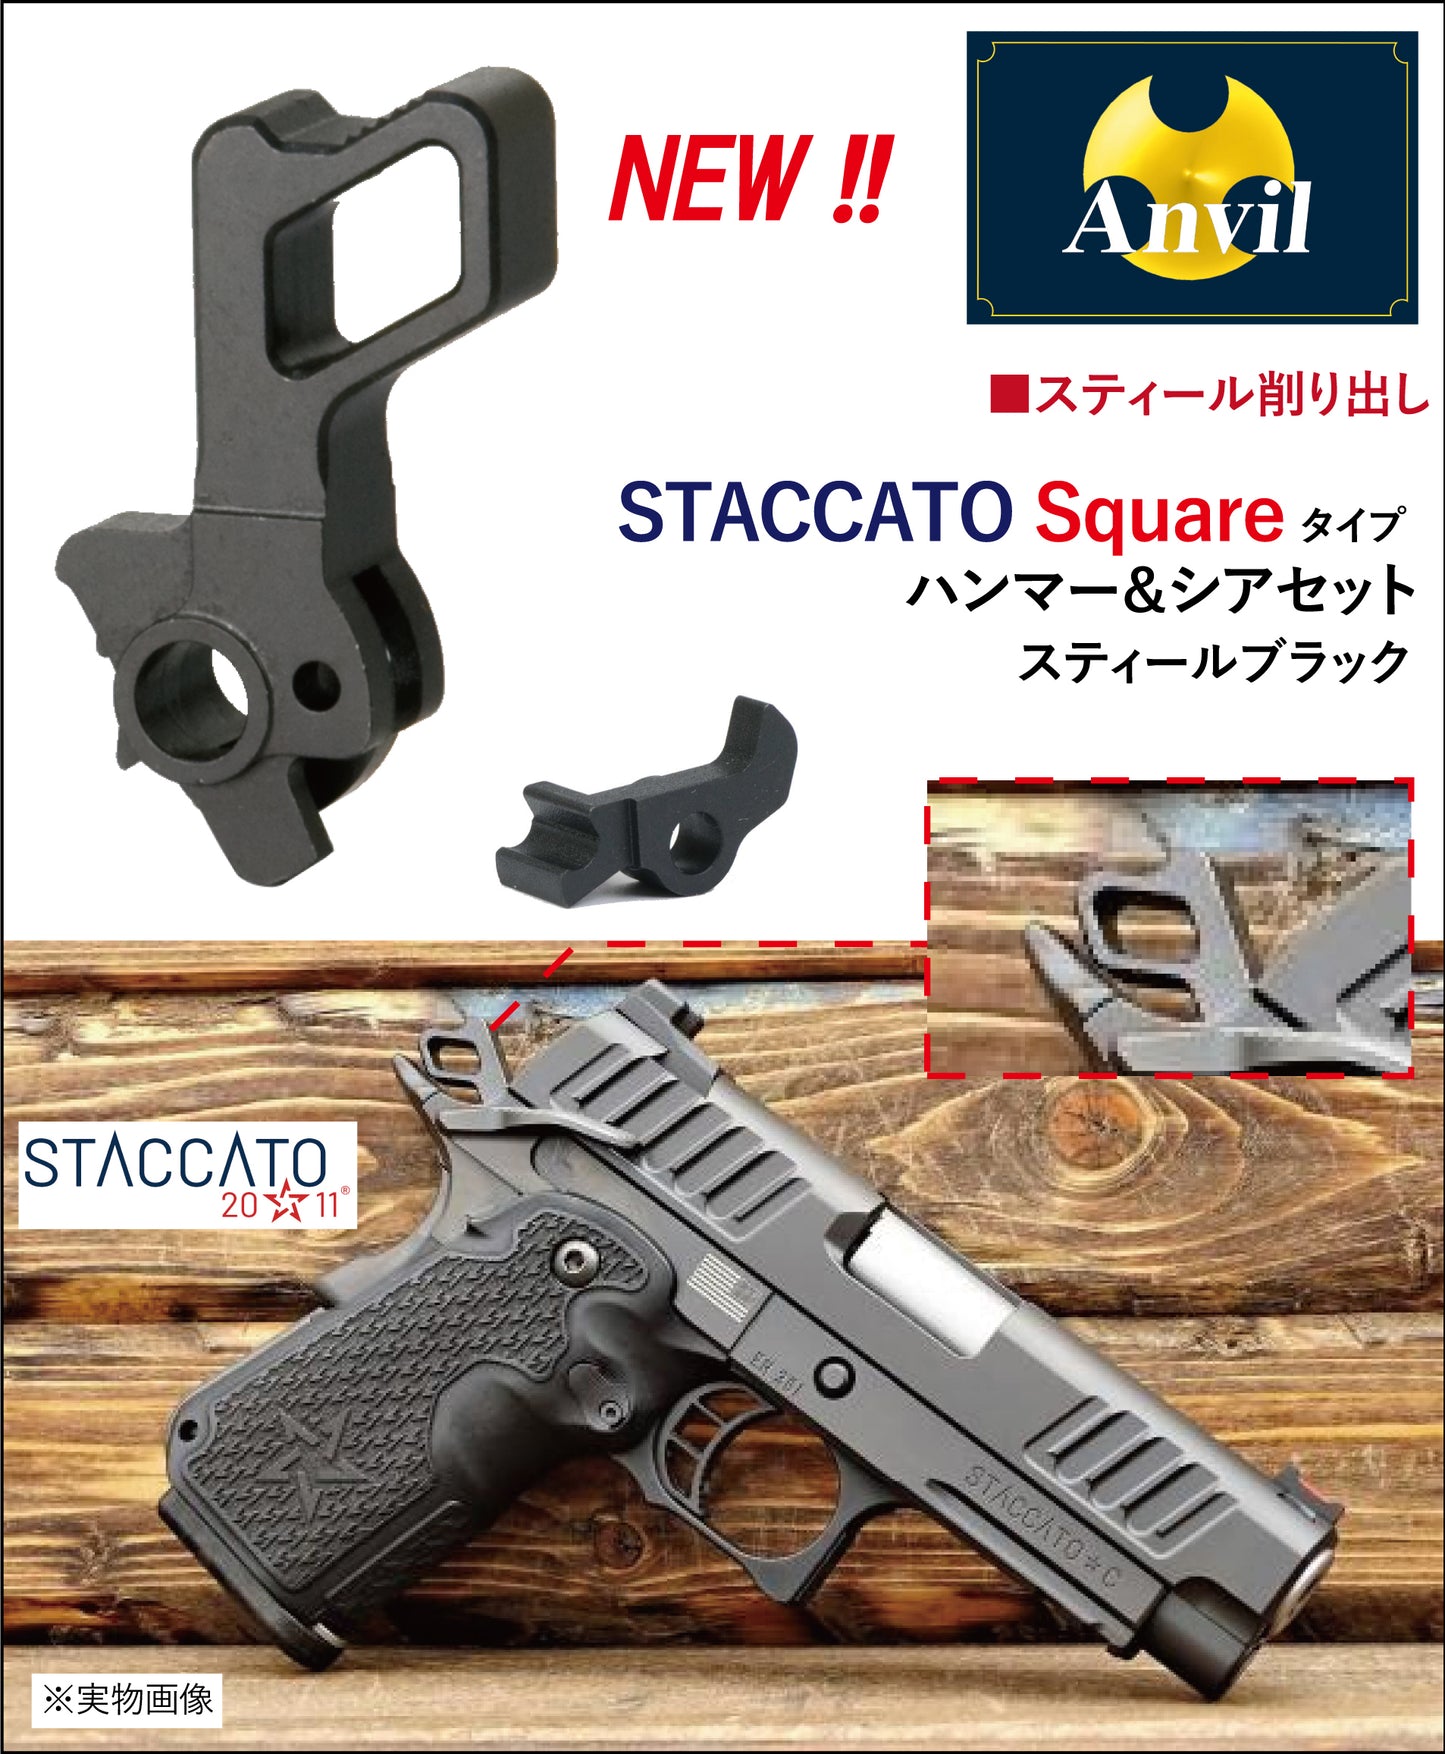 Nova CNC Steel Staccato Spuare Type Hammer & Sear Set for Marui Hicapa / 1911 Airsoft GBB Series